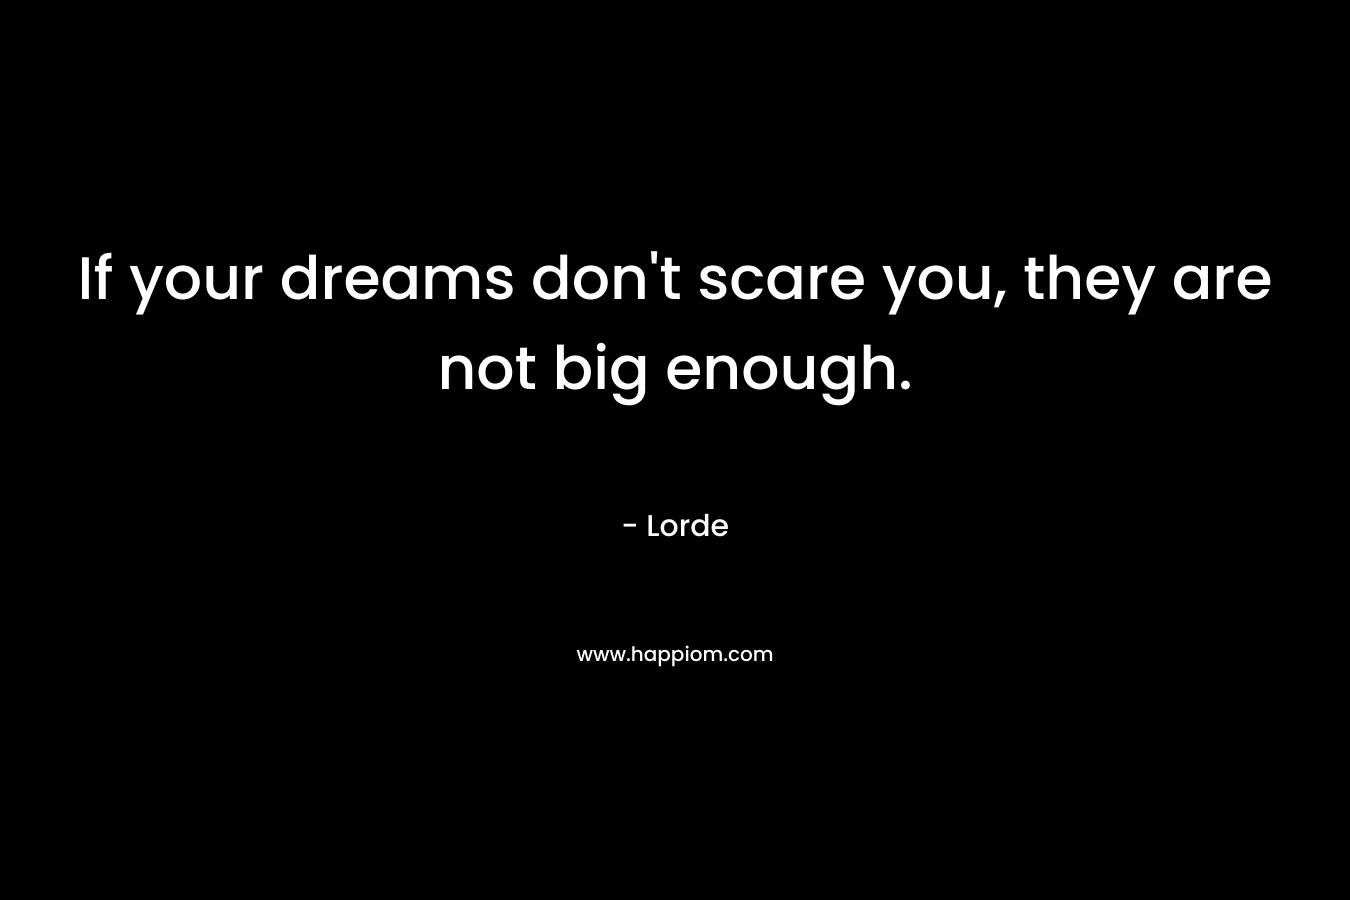 If your dreams don’t scare you, they are not big enough. – Lorde